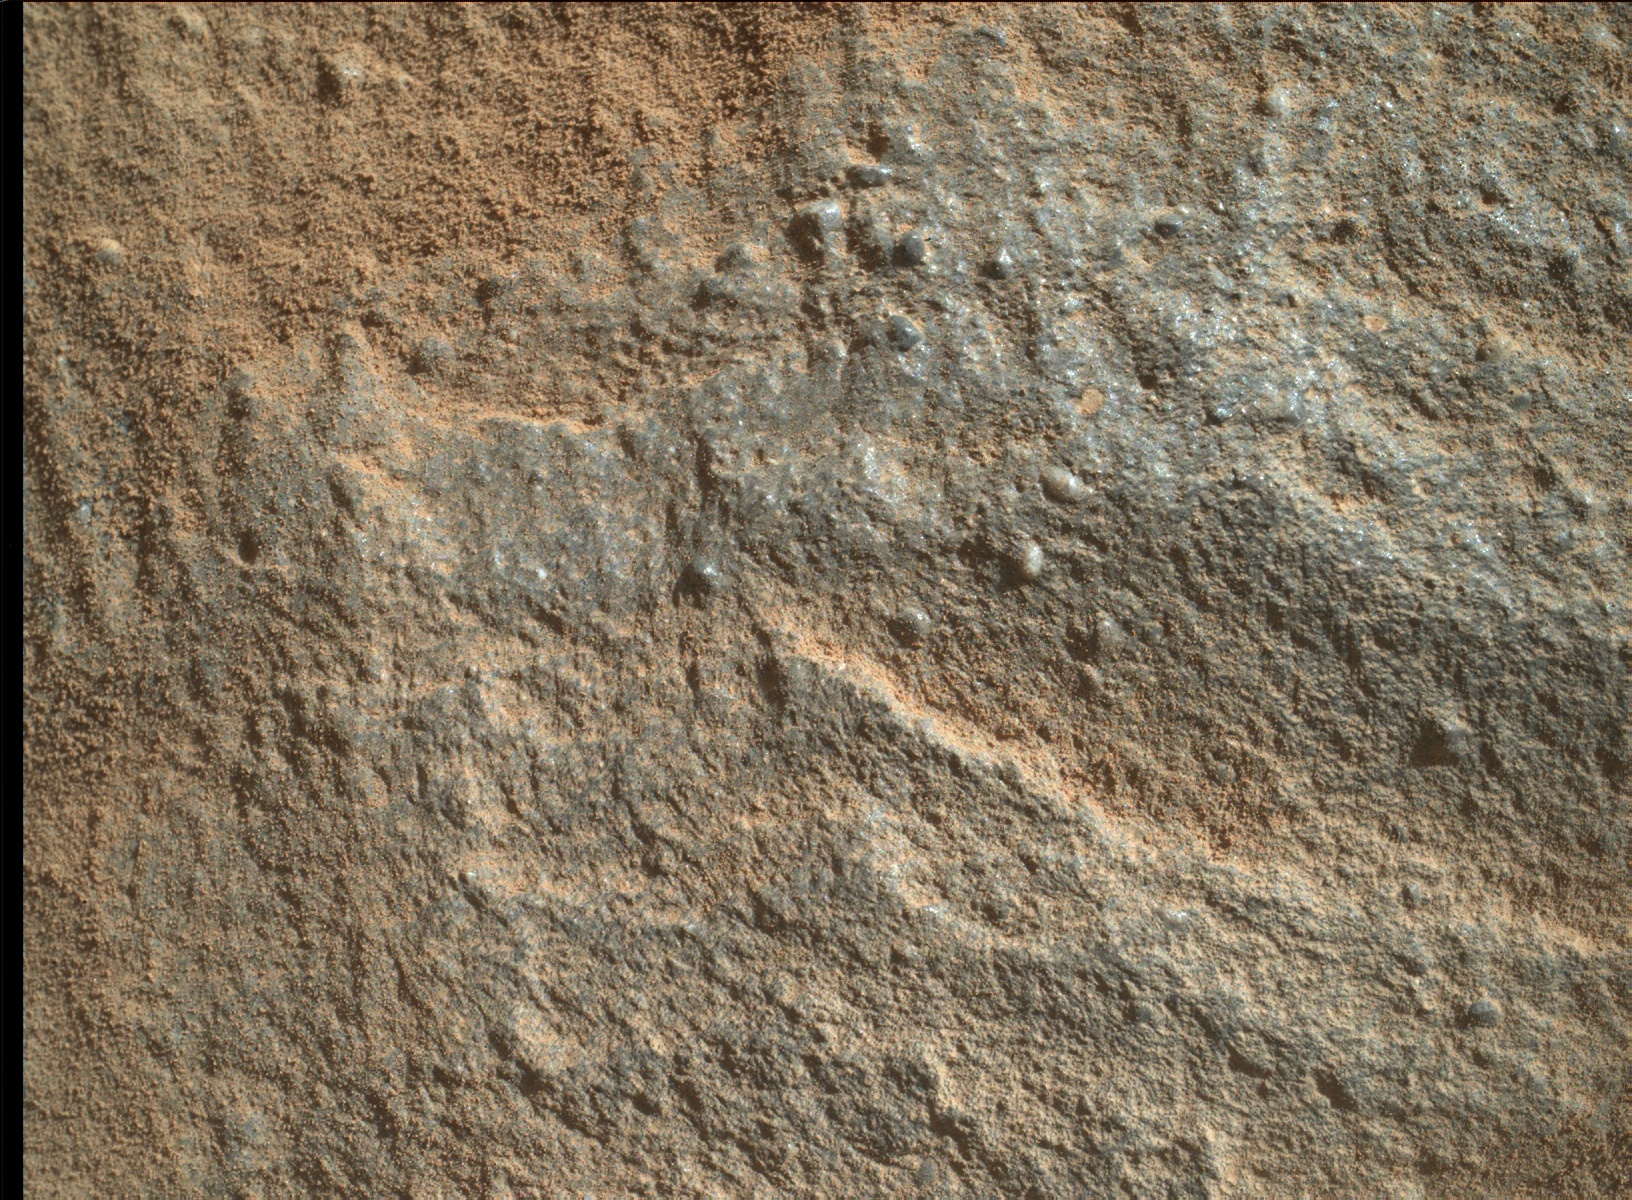 Nasa's Mars rover Curiosity acquired this image using its Mars Hand Lens Imager (MAHLI) on Sol 1287